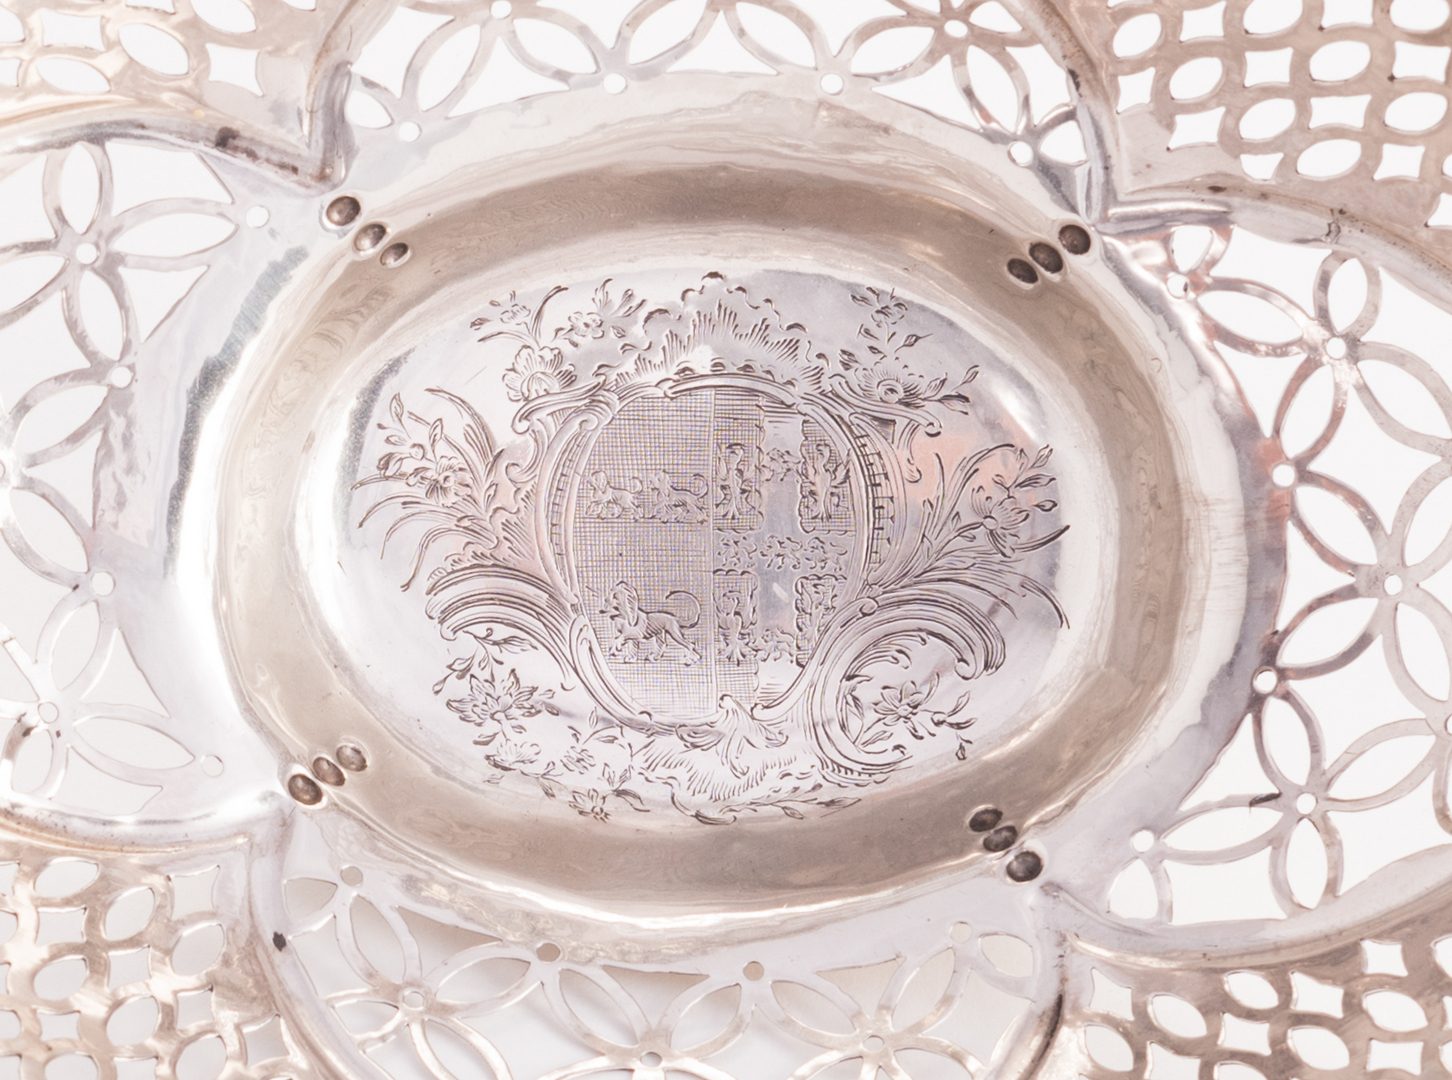 Lot 75: George III Sterling Silver Epergne